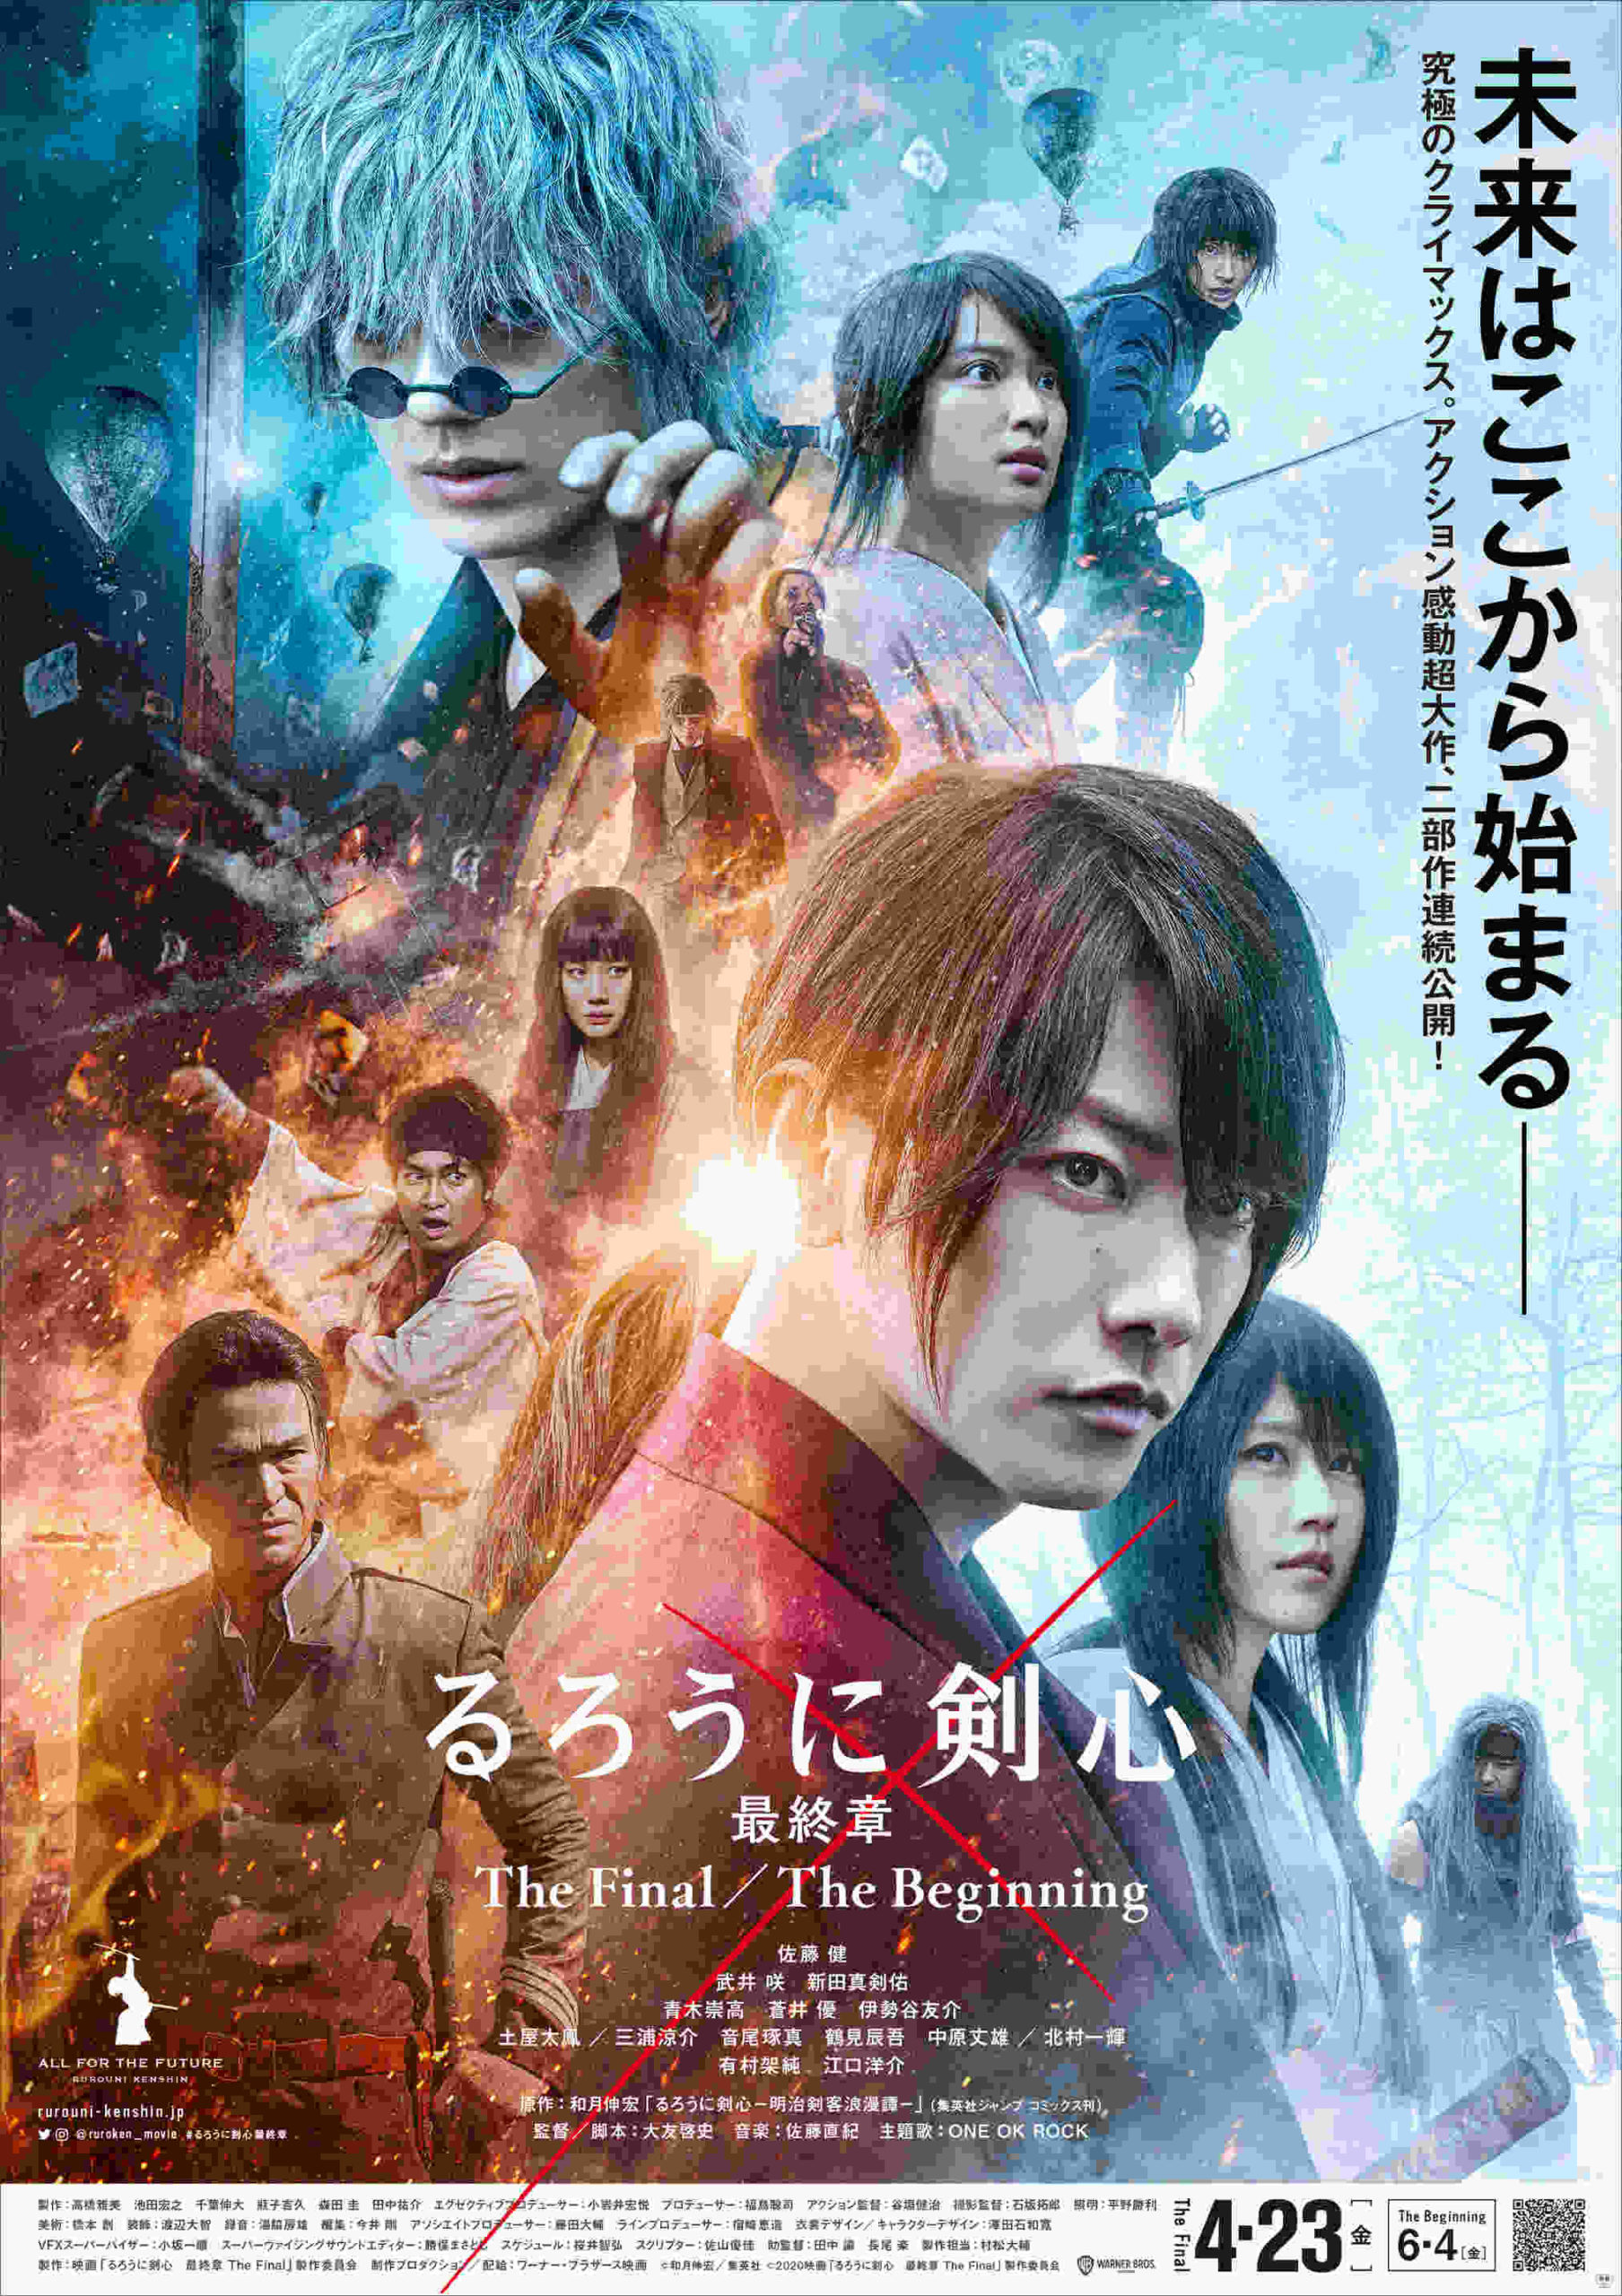 New Rurouni Kenshin Live-Action Movies To Air In 2021, Fans Are